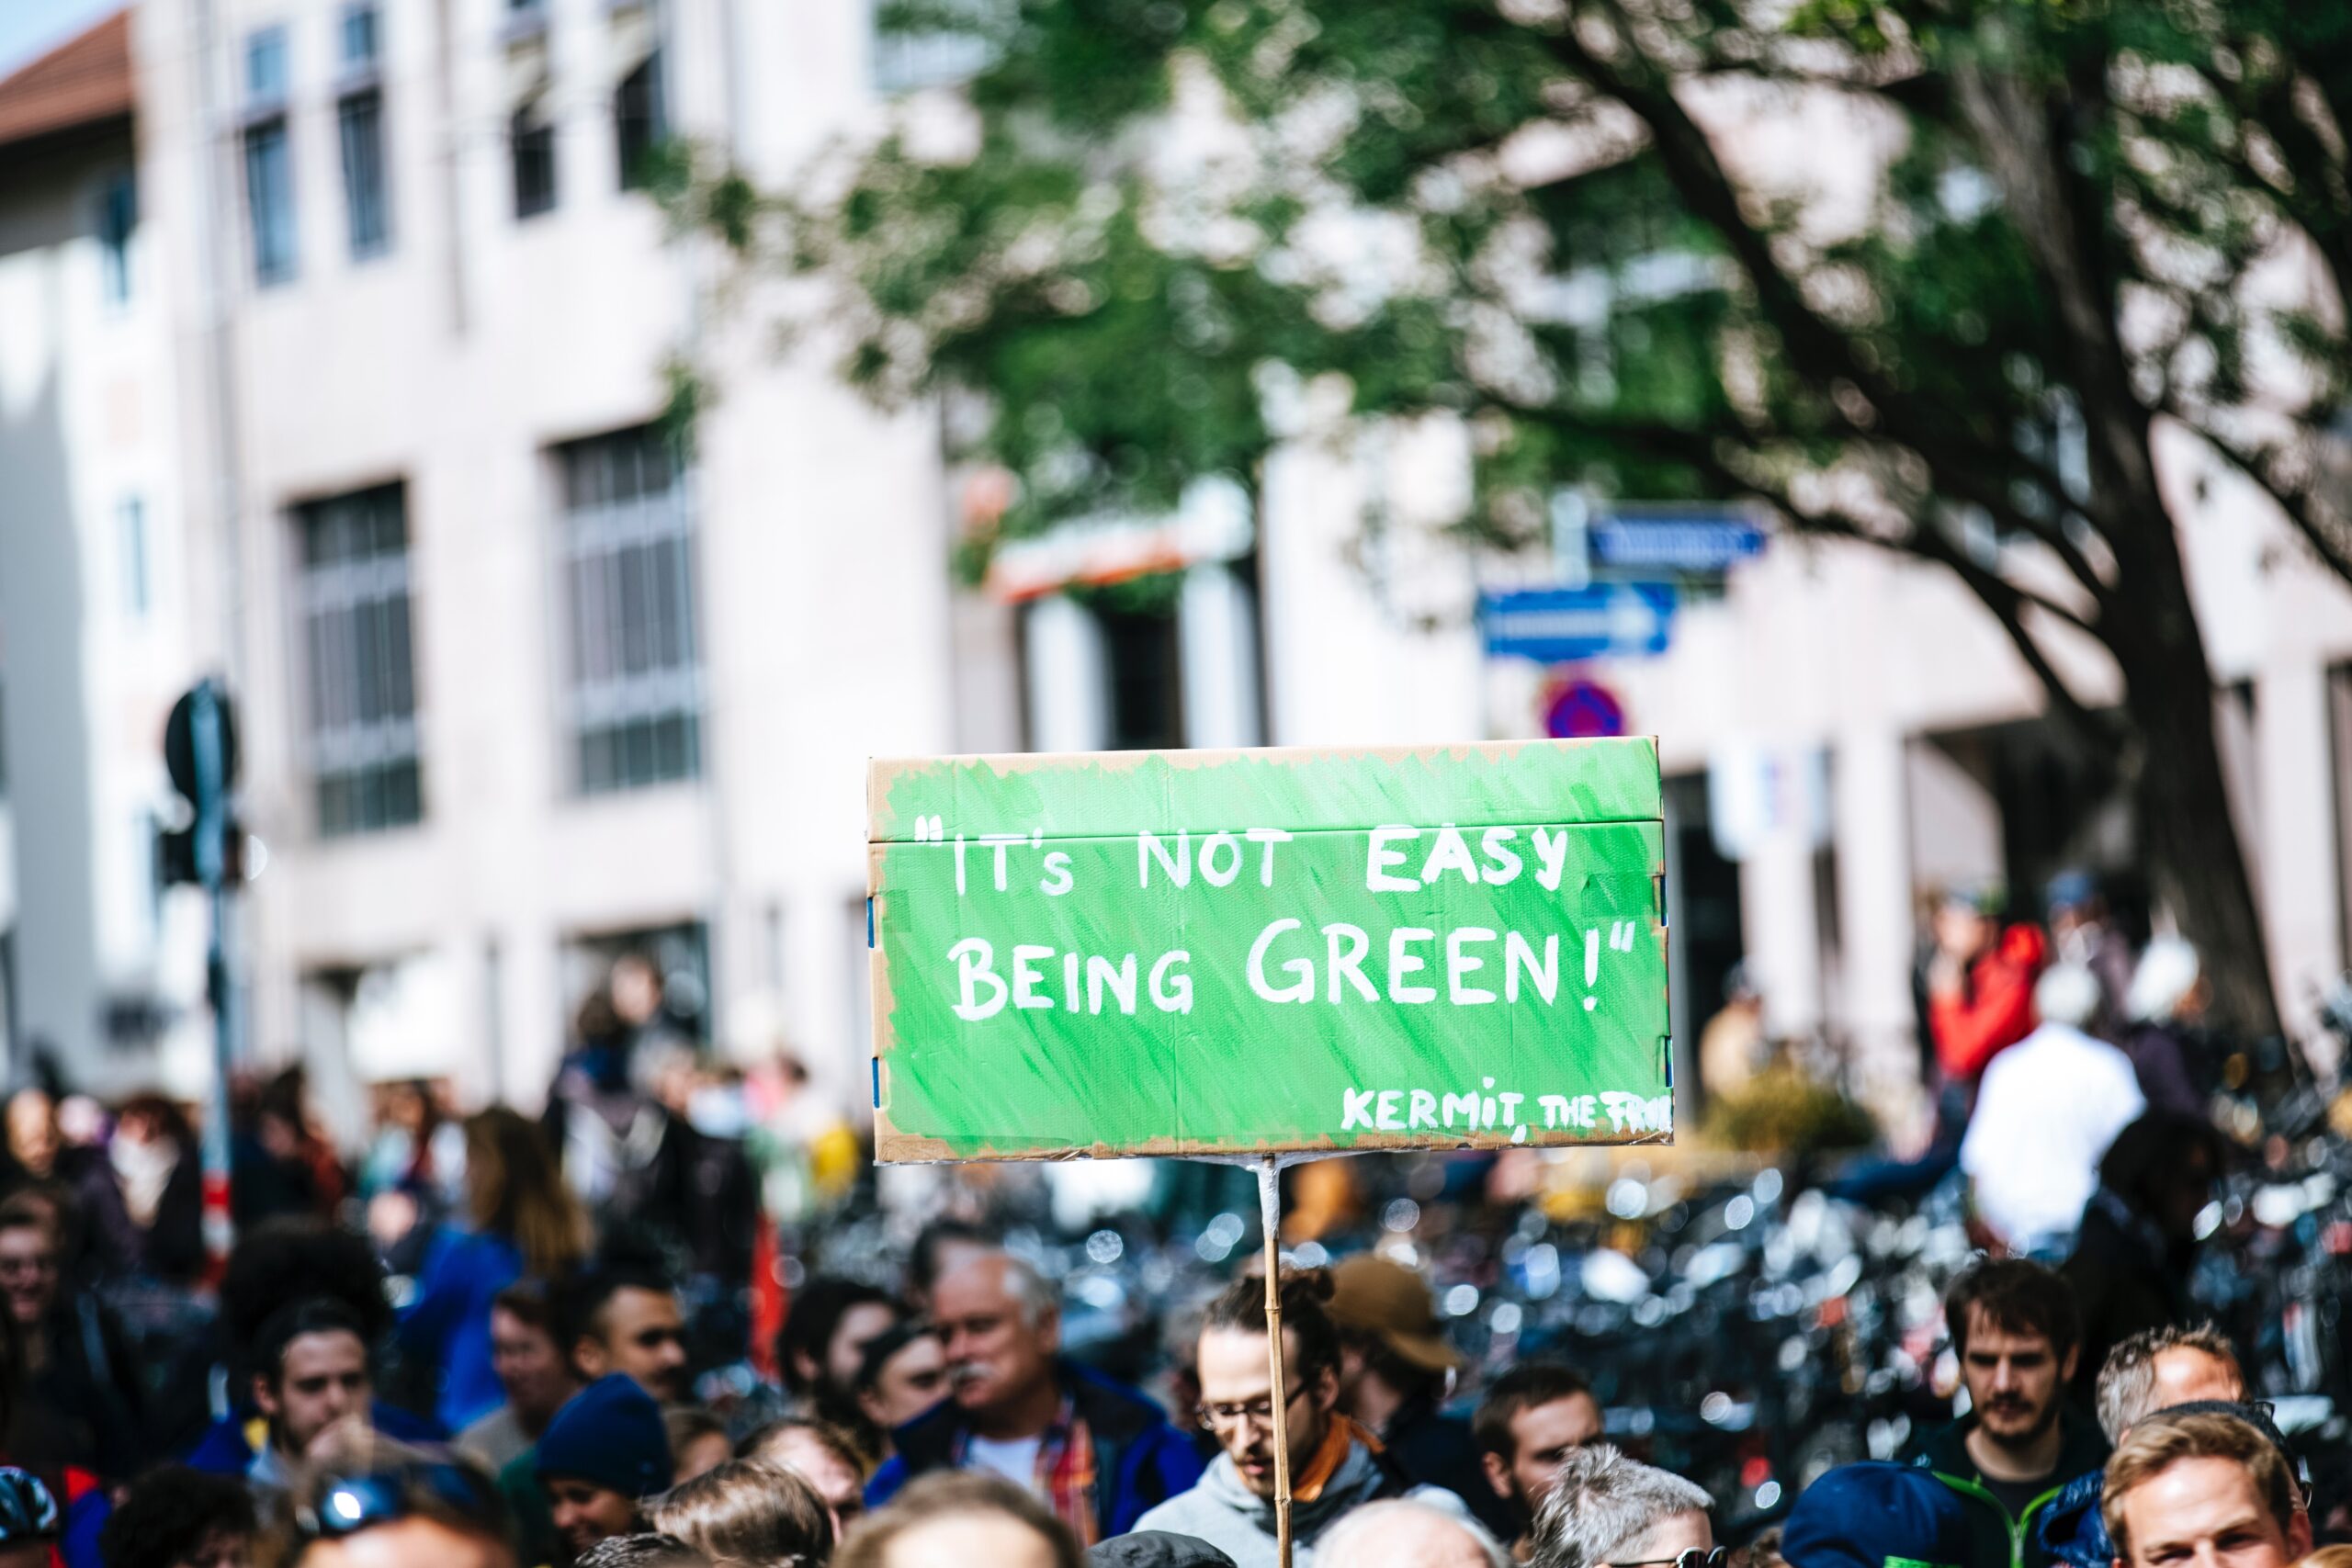 Its not easy being green placard at demonstration